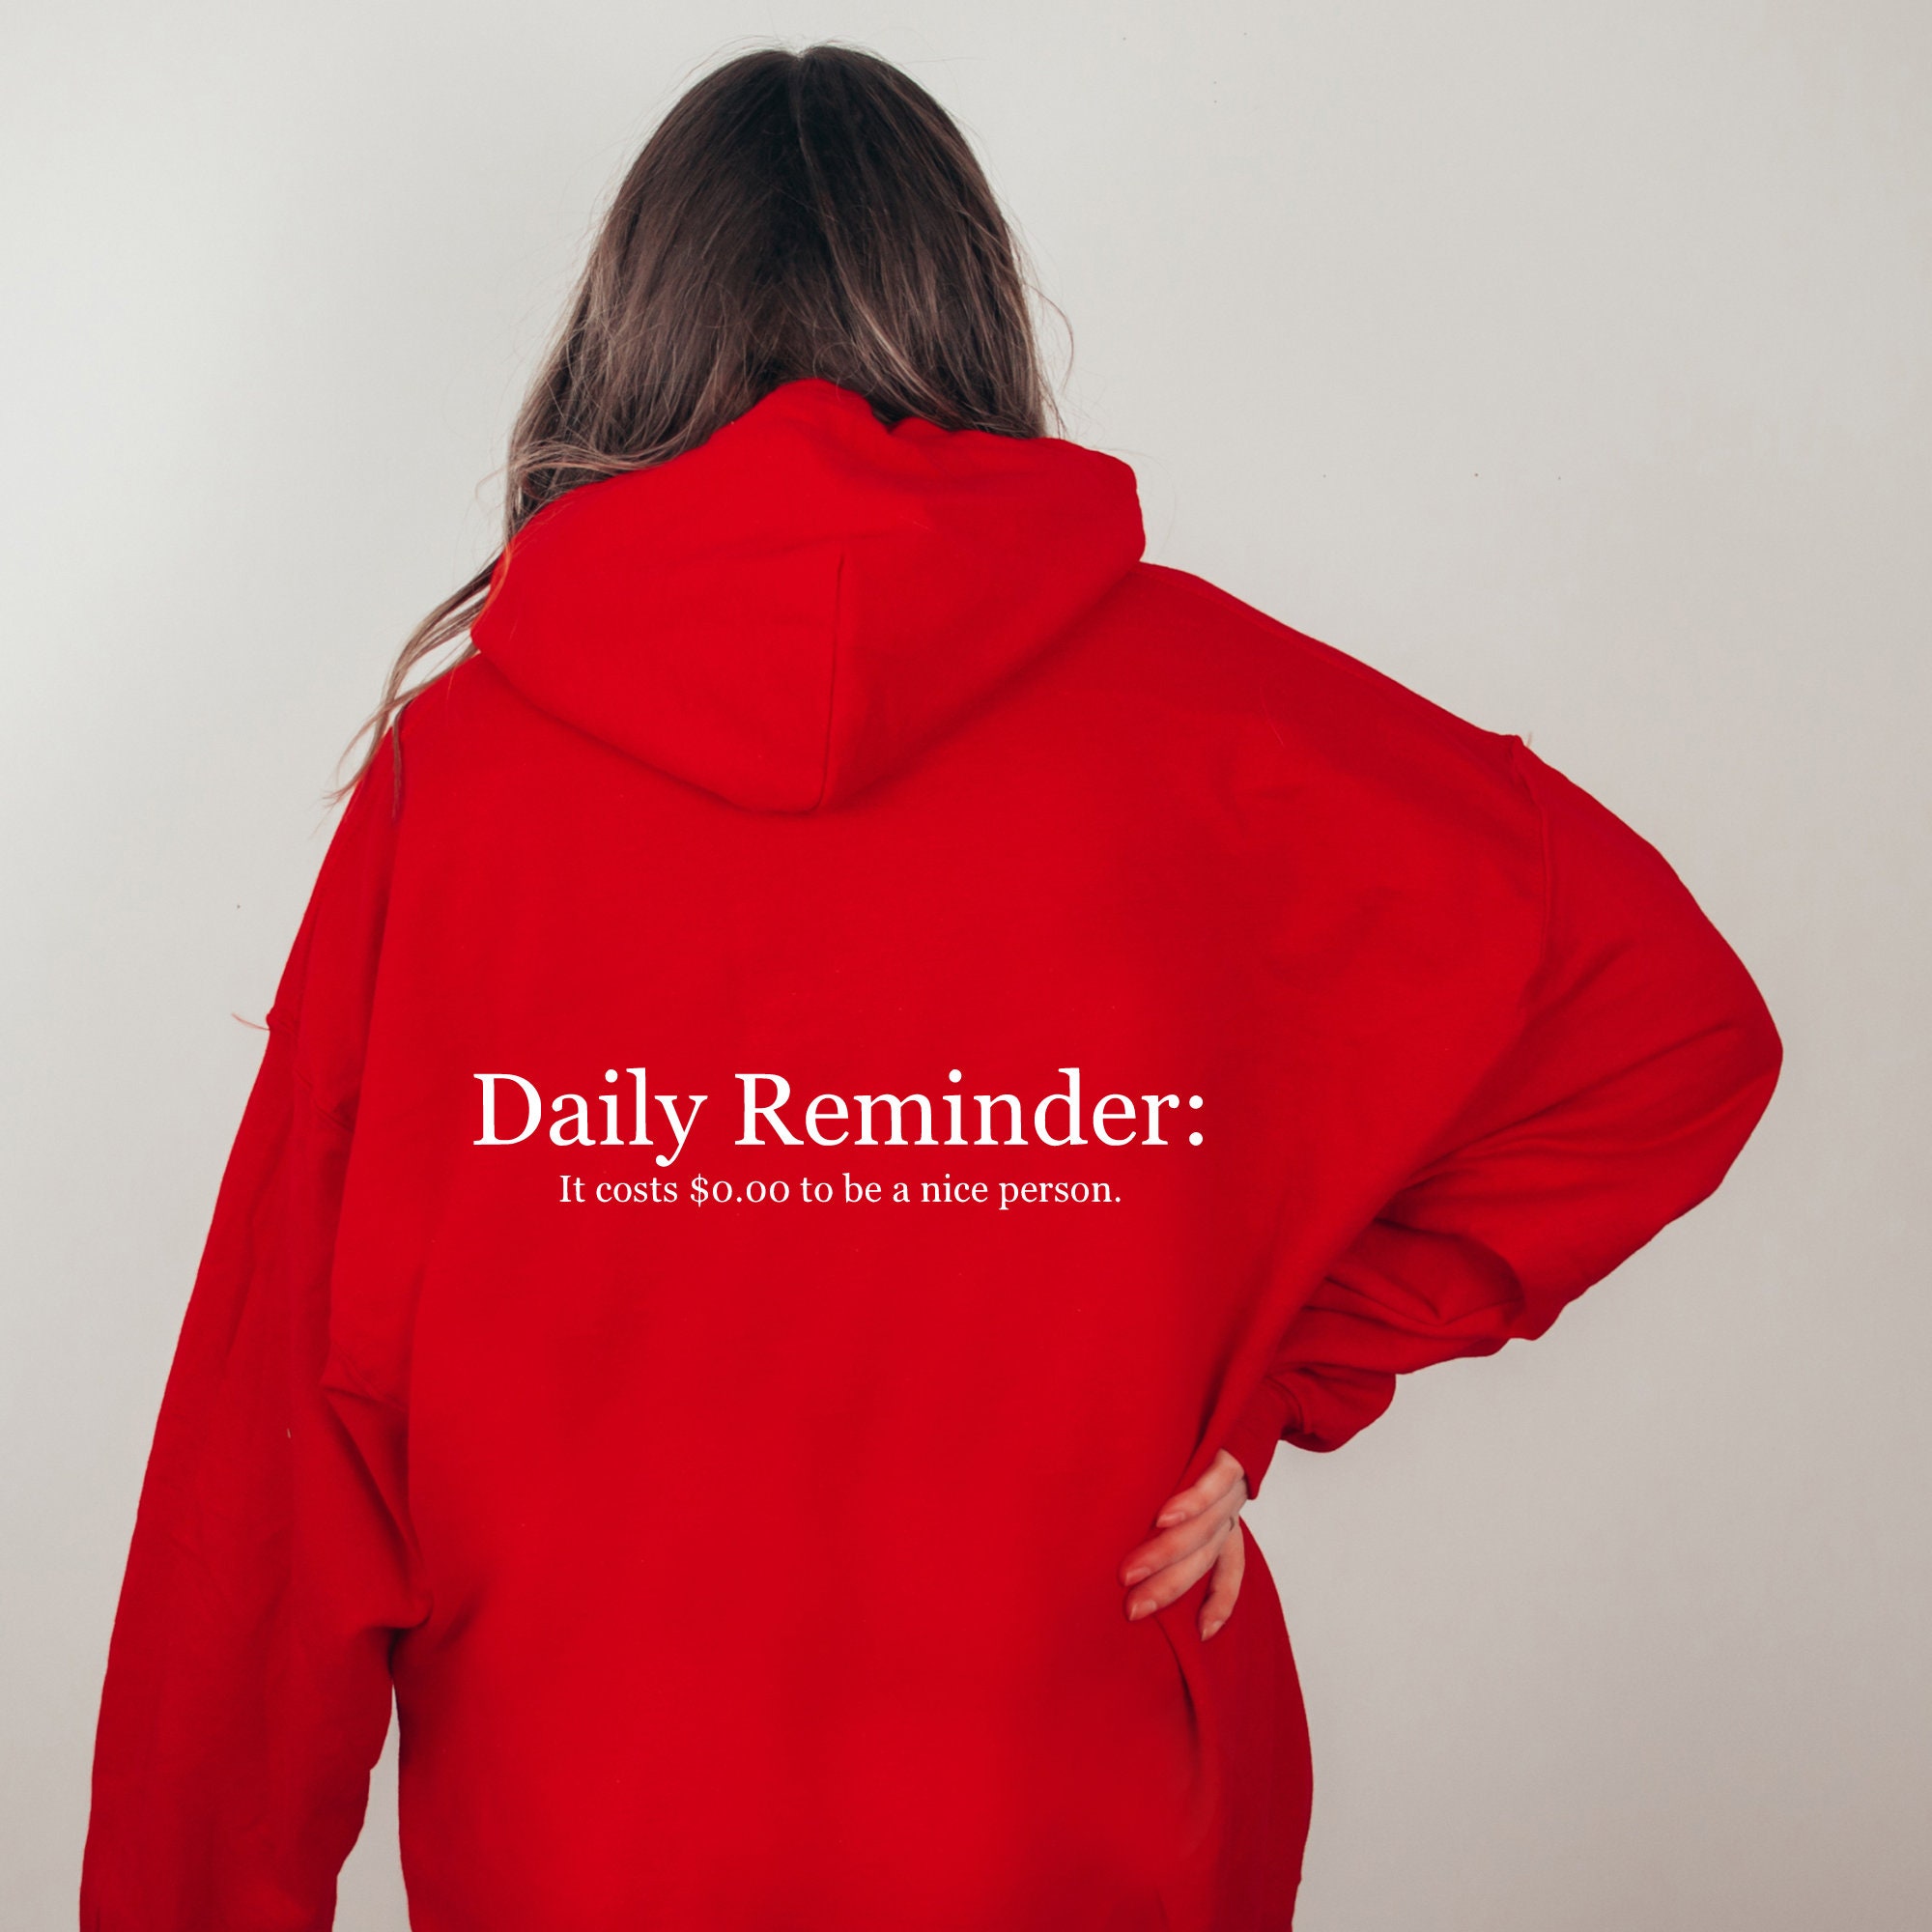  JIOEEH Aesthetic Hoodies Women Daily Hooded,cool things under 5  dollars,1 cent stuff,recent orders placed by me,sales today deals prime  under 10,sold and shipped items only : Clothing, Shoes & Jewelry